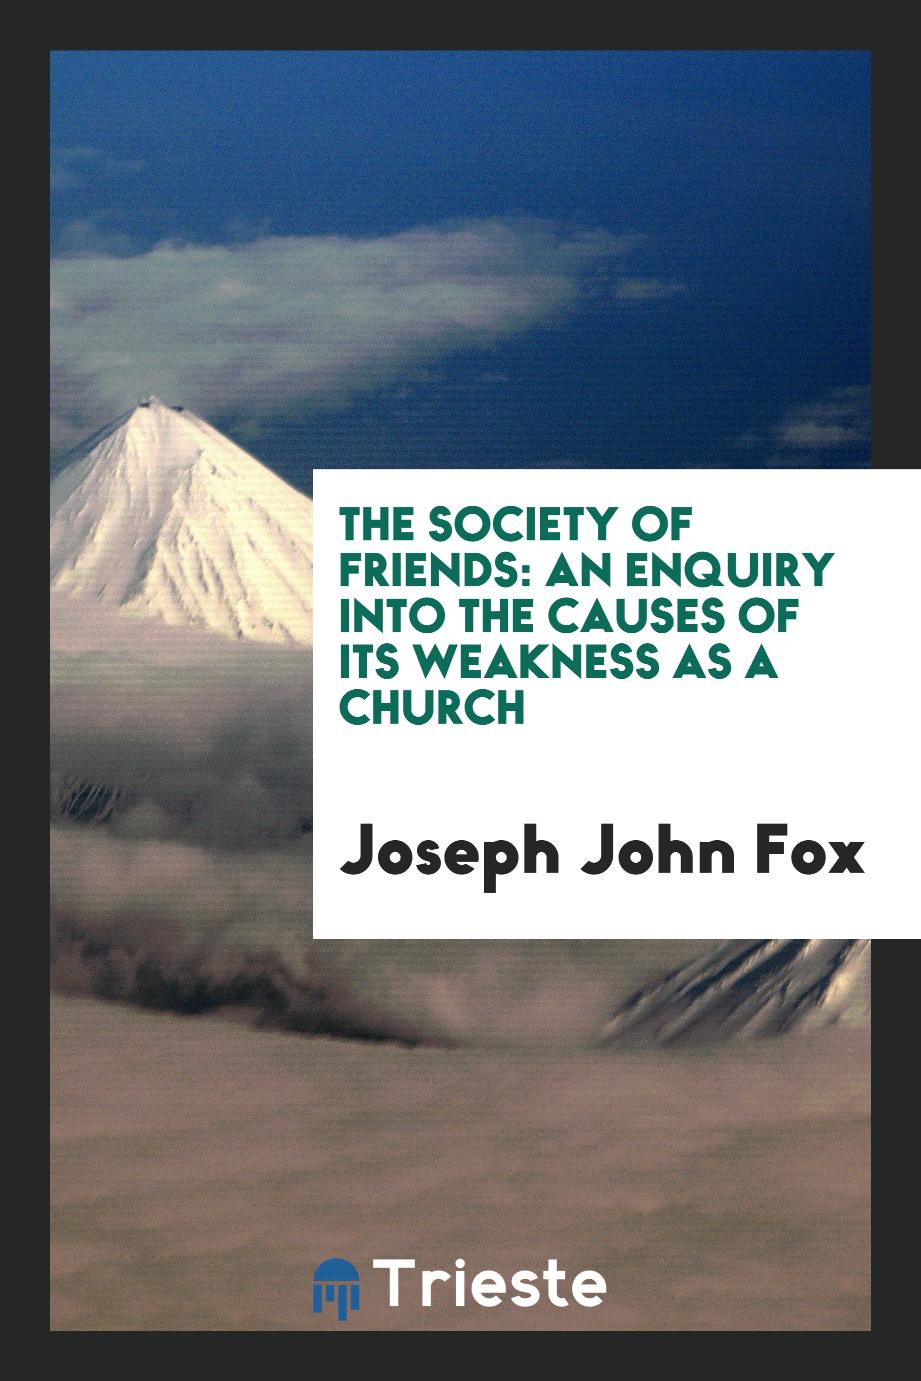 The Society of Friends: An Enquiry into the Causes of Its Weakness as a Church